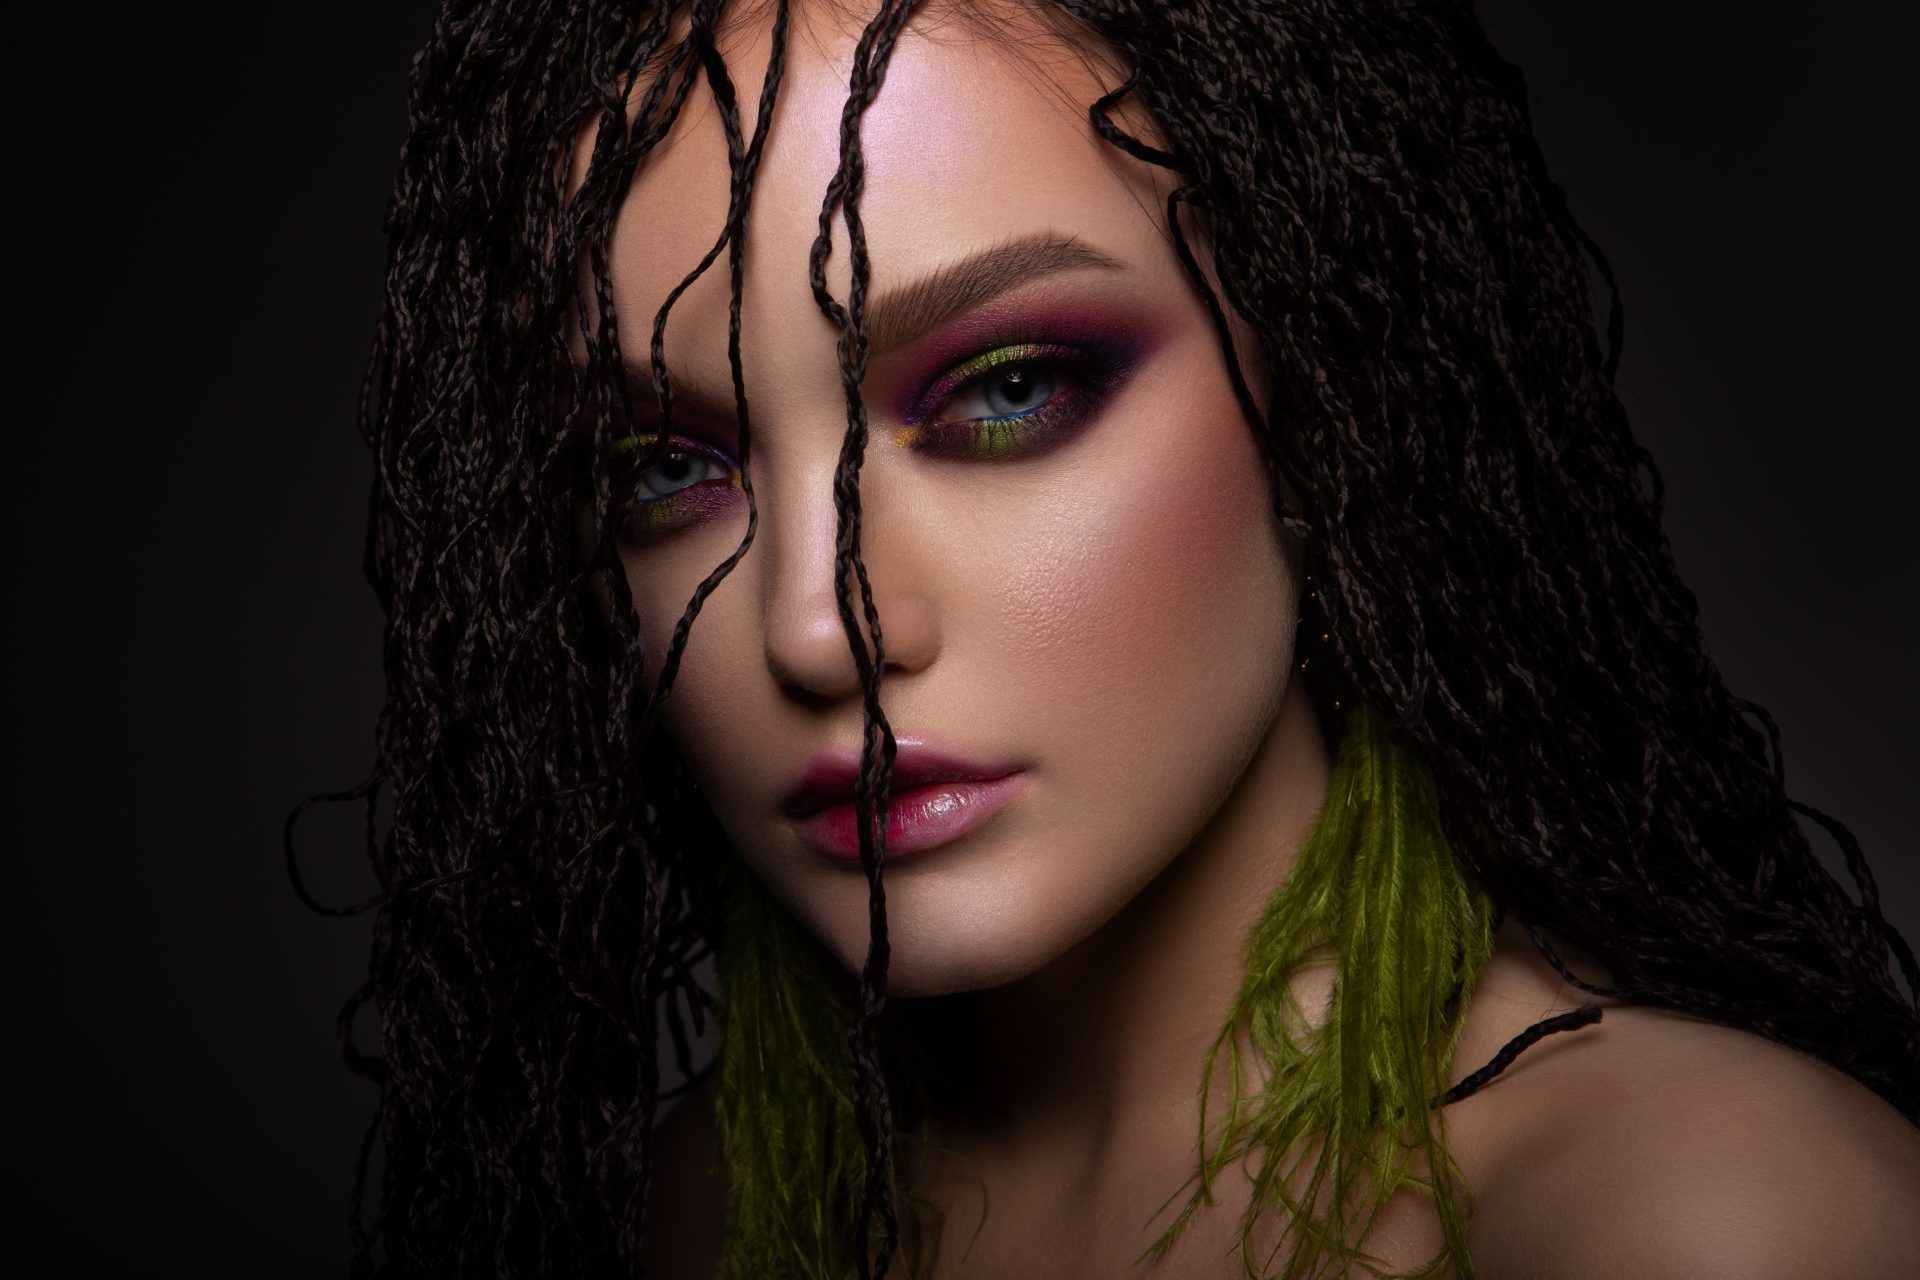 Woman with colorful make up and braids